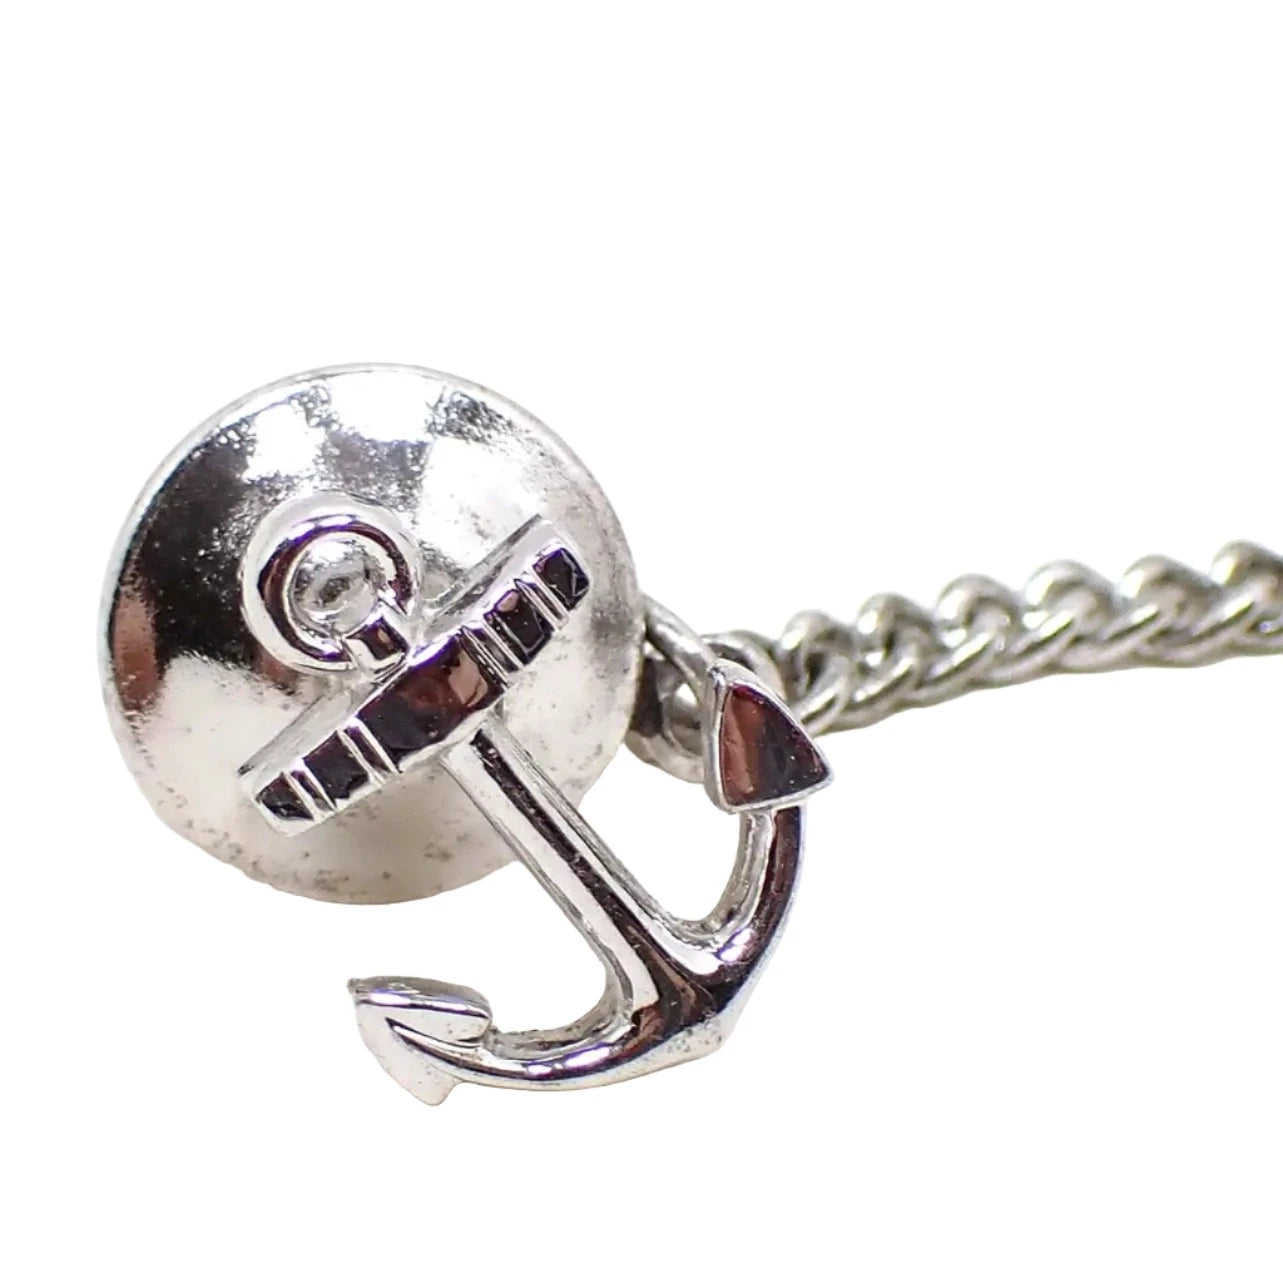 Enlarged front view of the retro vintage tie tack. It is silver tone in color and shaped like a boat or ship anchor. 